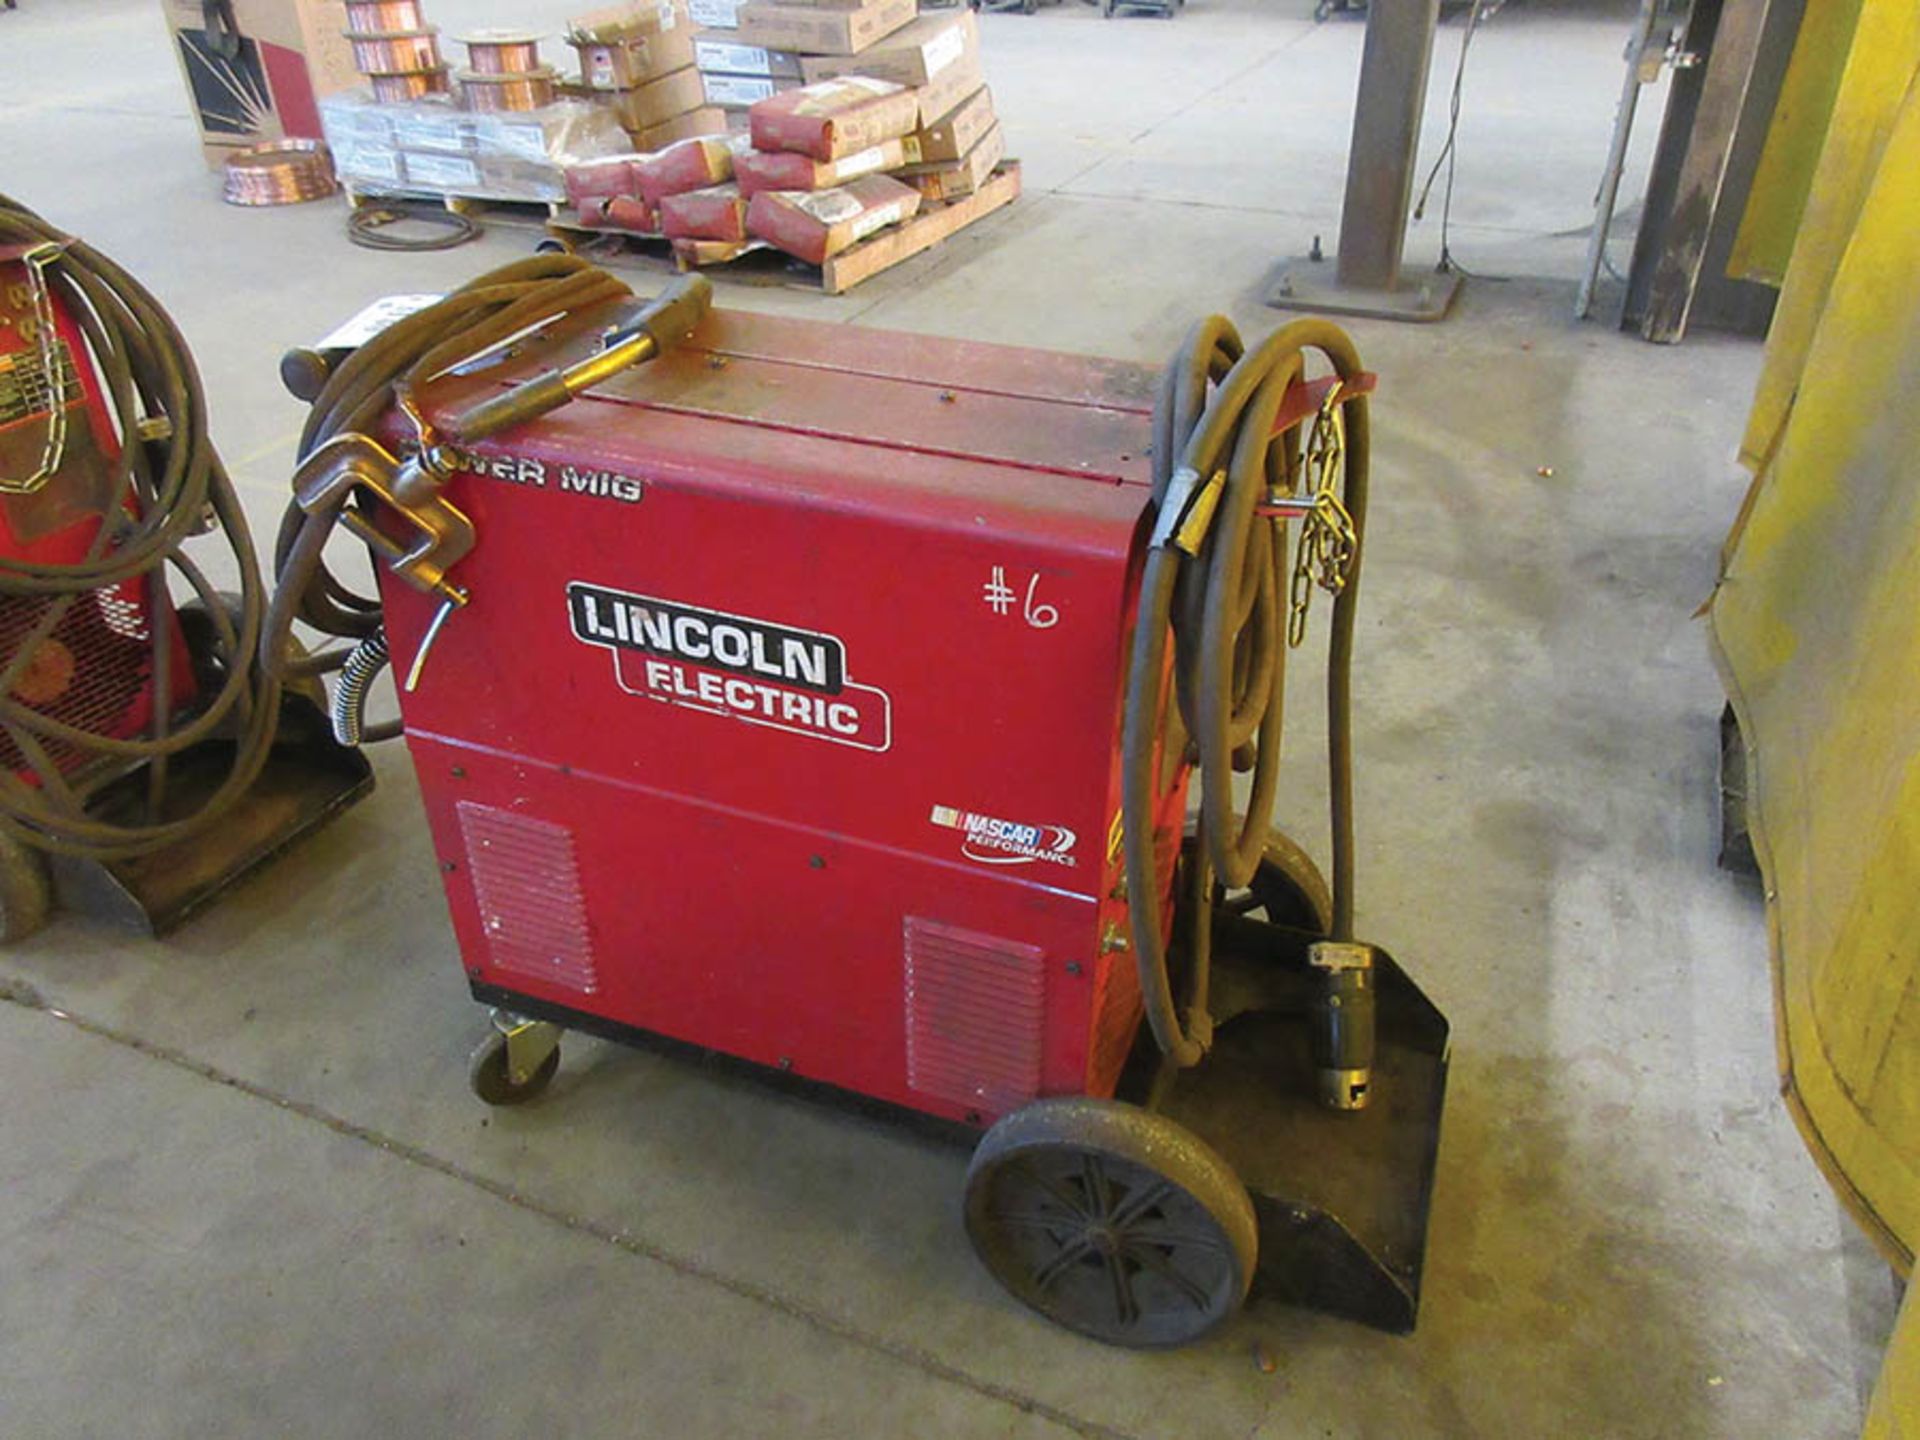 LINCOLN ELECTRIC 350MP POWER MIG WELDER WITH TWECO WELDSKILL MIG GUN, #6 - Image 2 of 3